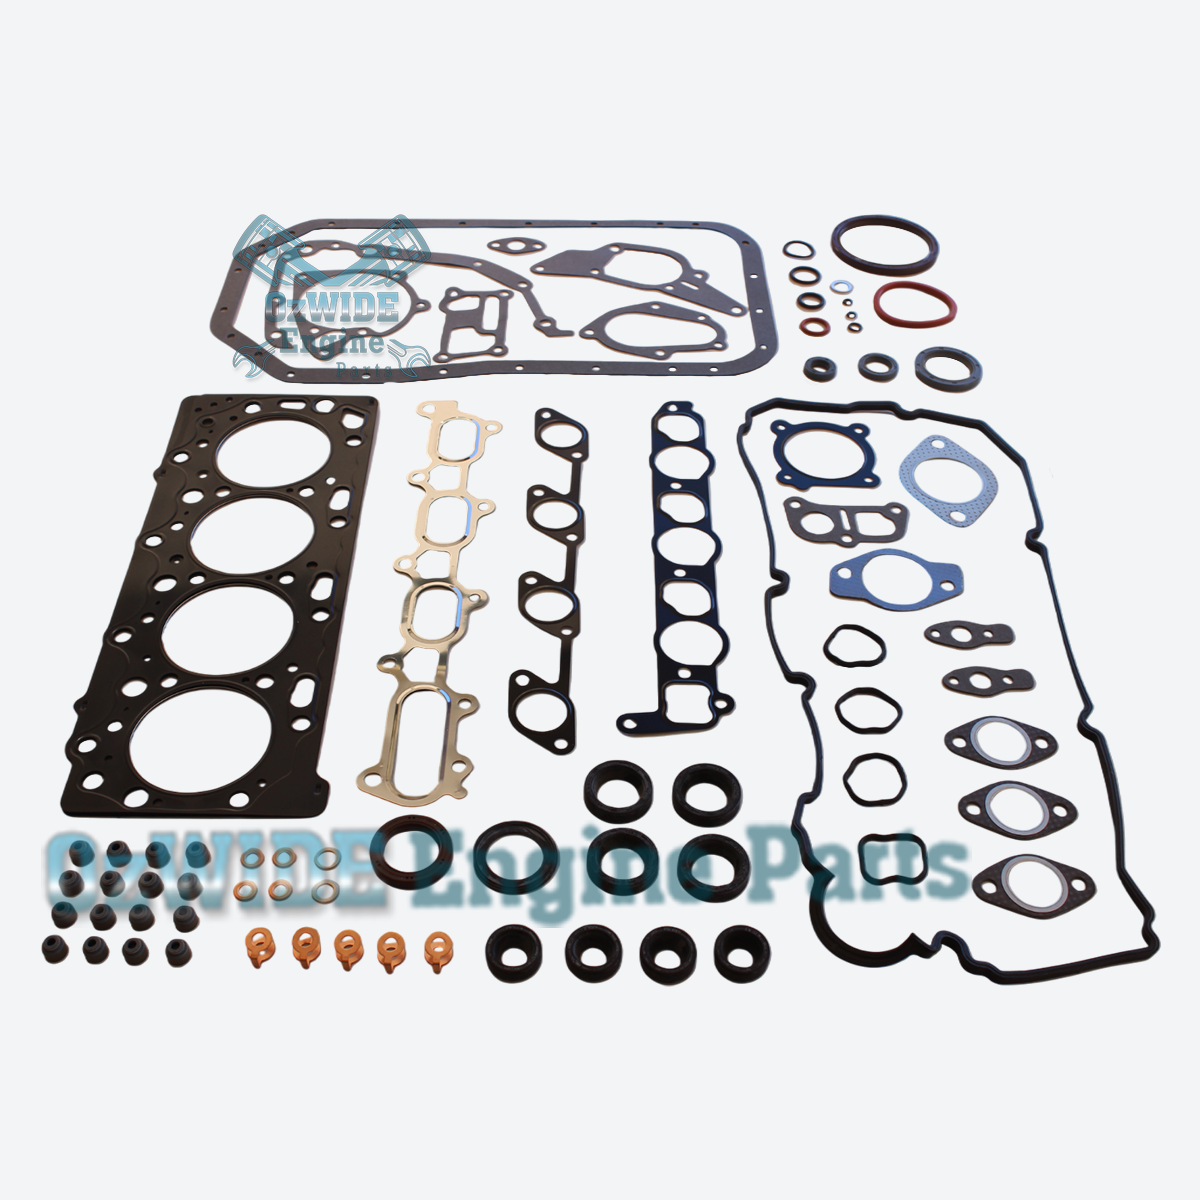 Mitsubishi 4D56Di-T Full Gasket Set for Triton and Challenger 4WD models